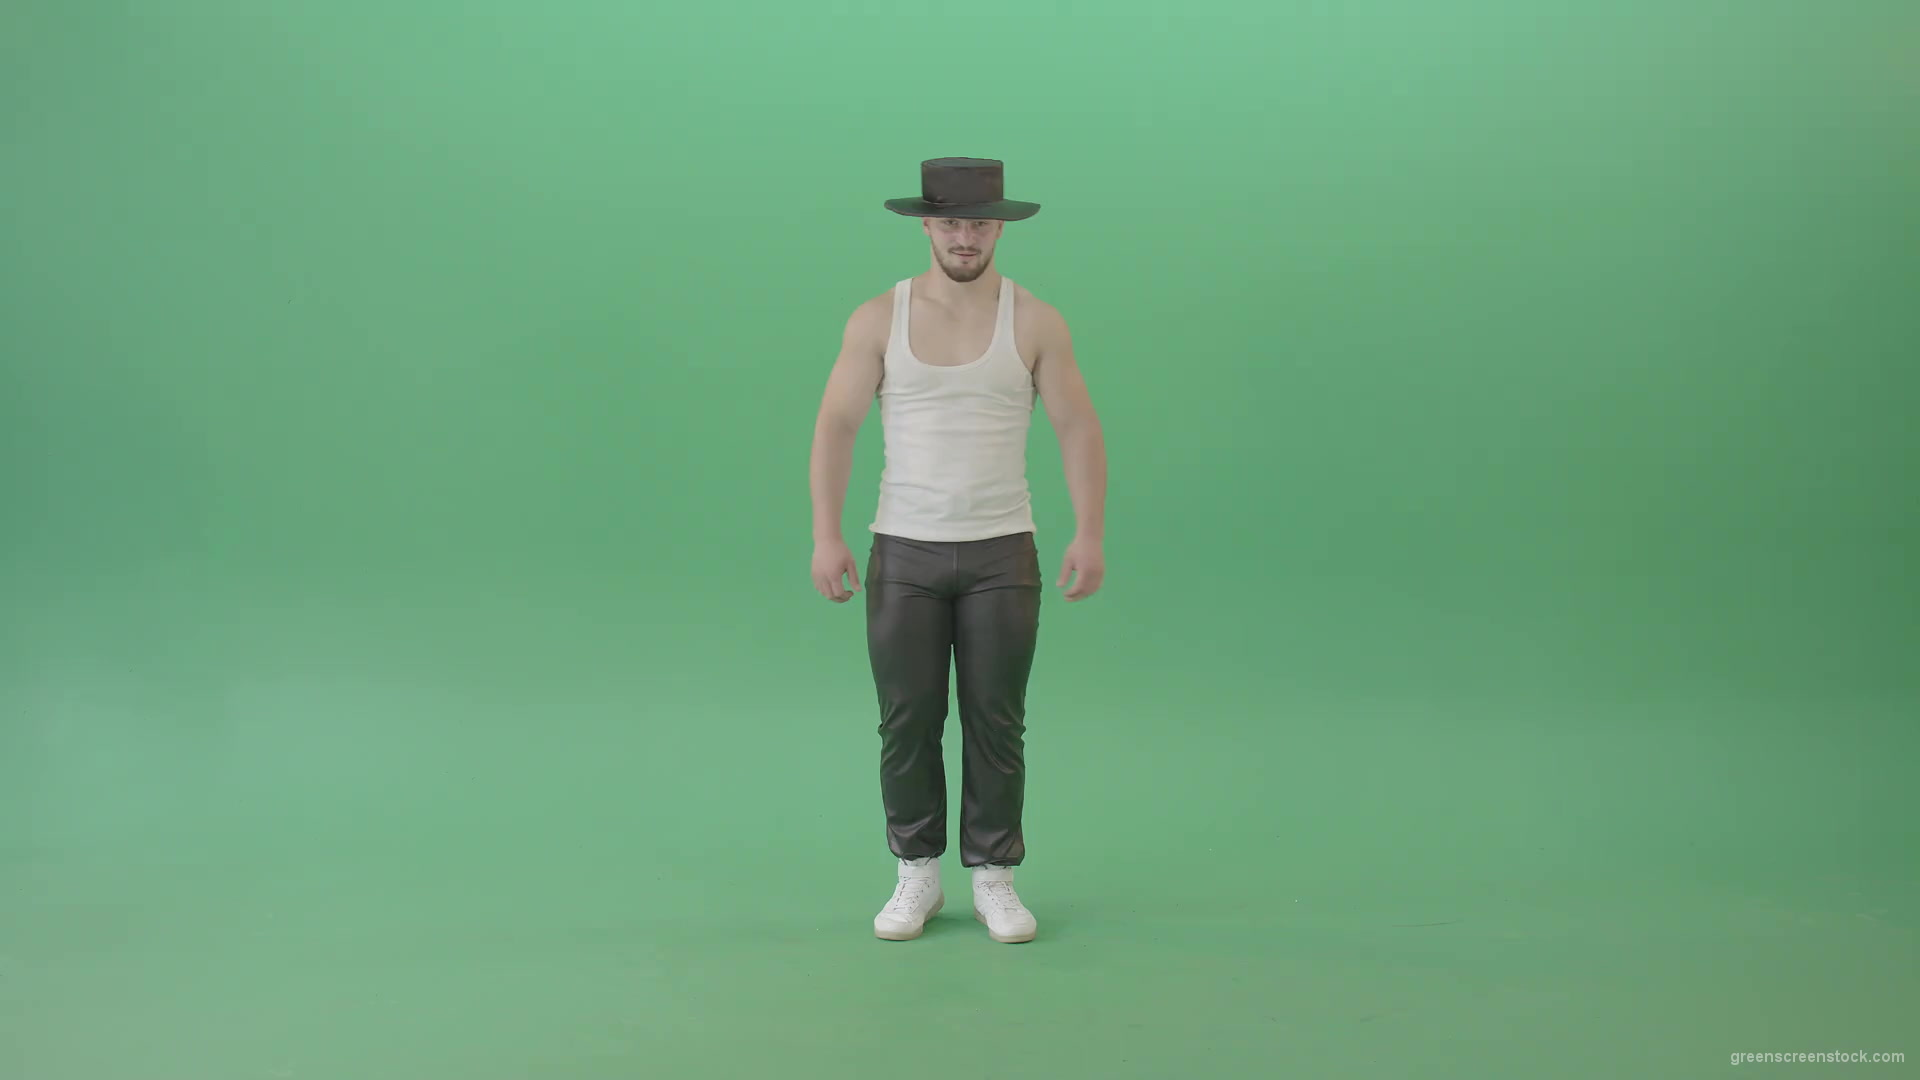 Funny-Man-marching-in-beat-isolated-on-Green-Screen-Chroma-Key-4K-Video-Footage-1920_001 Green Screen Stock